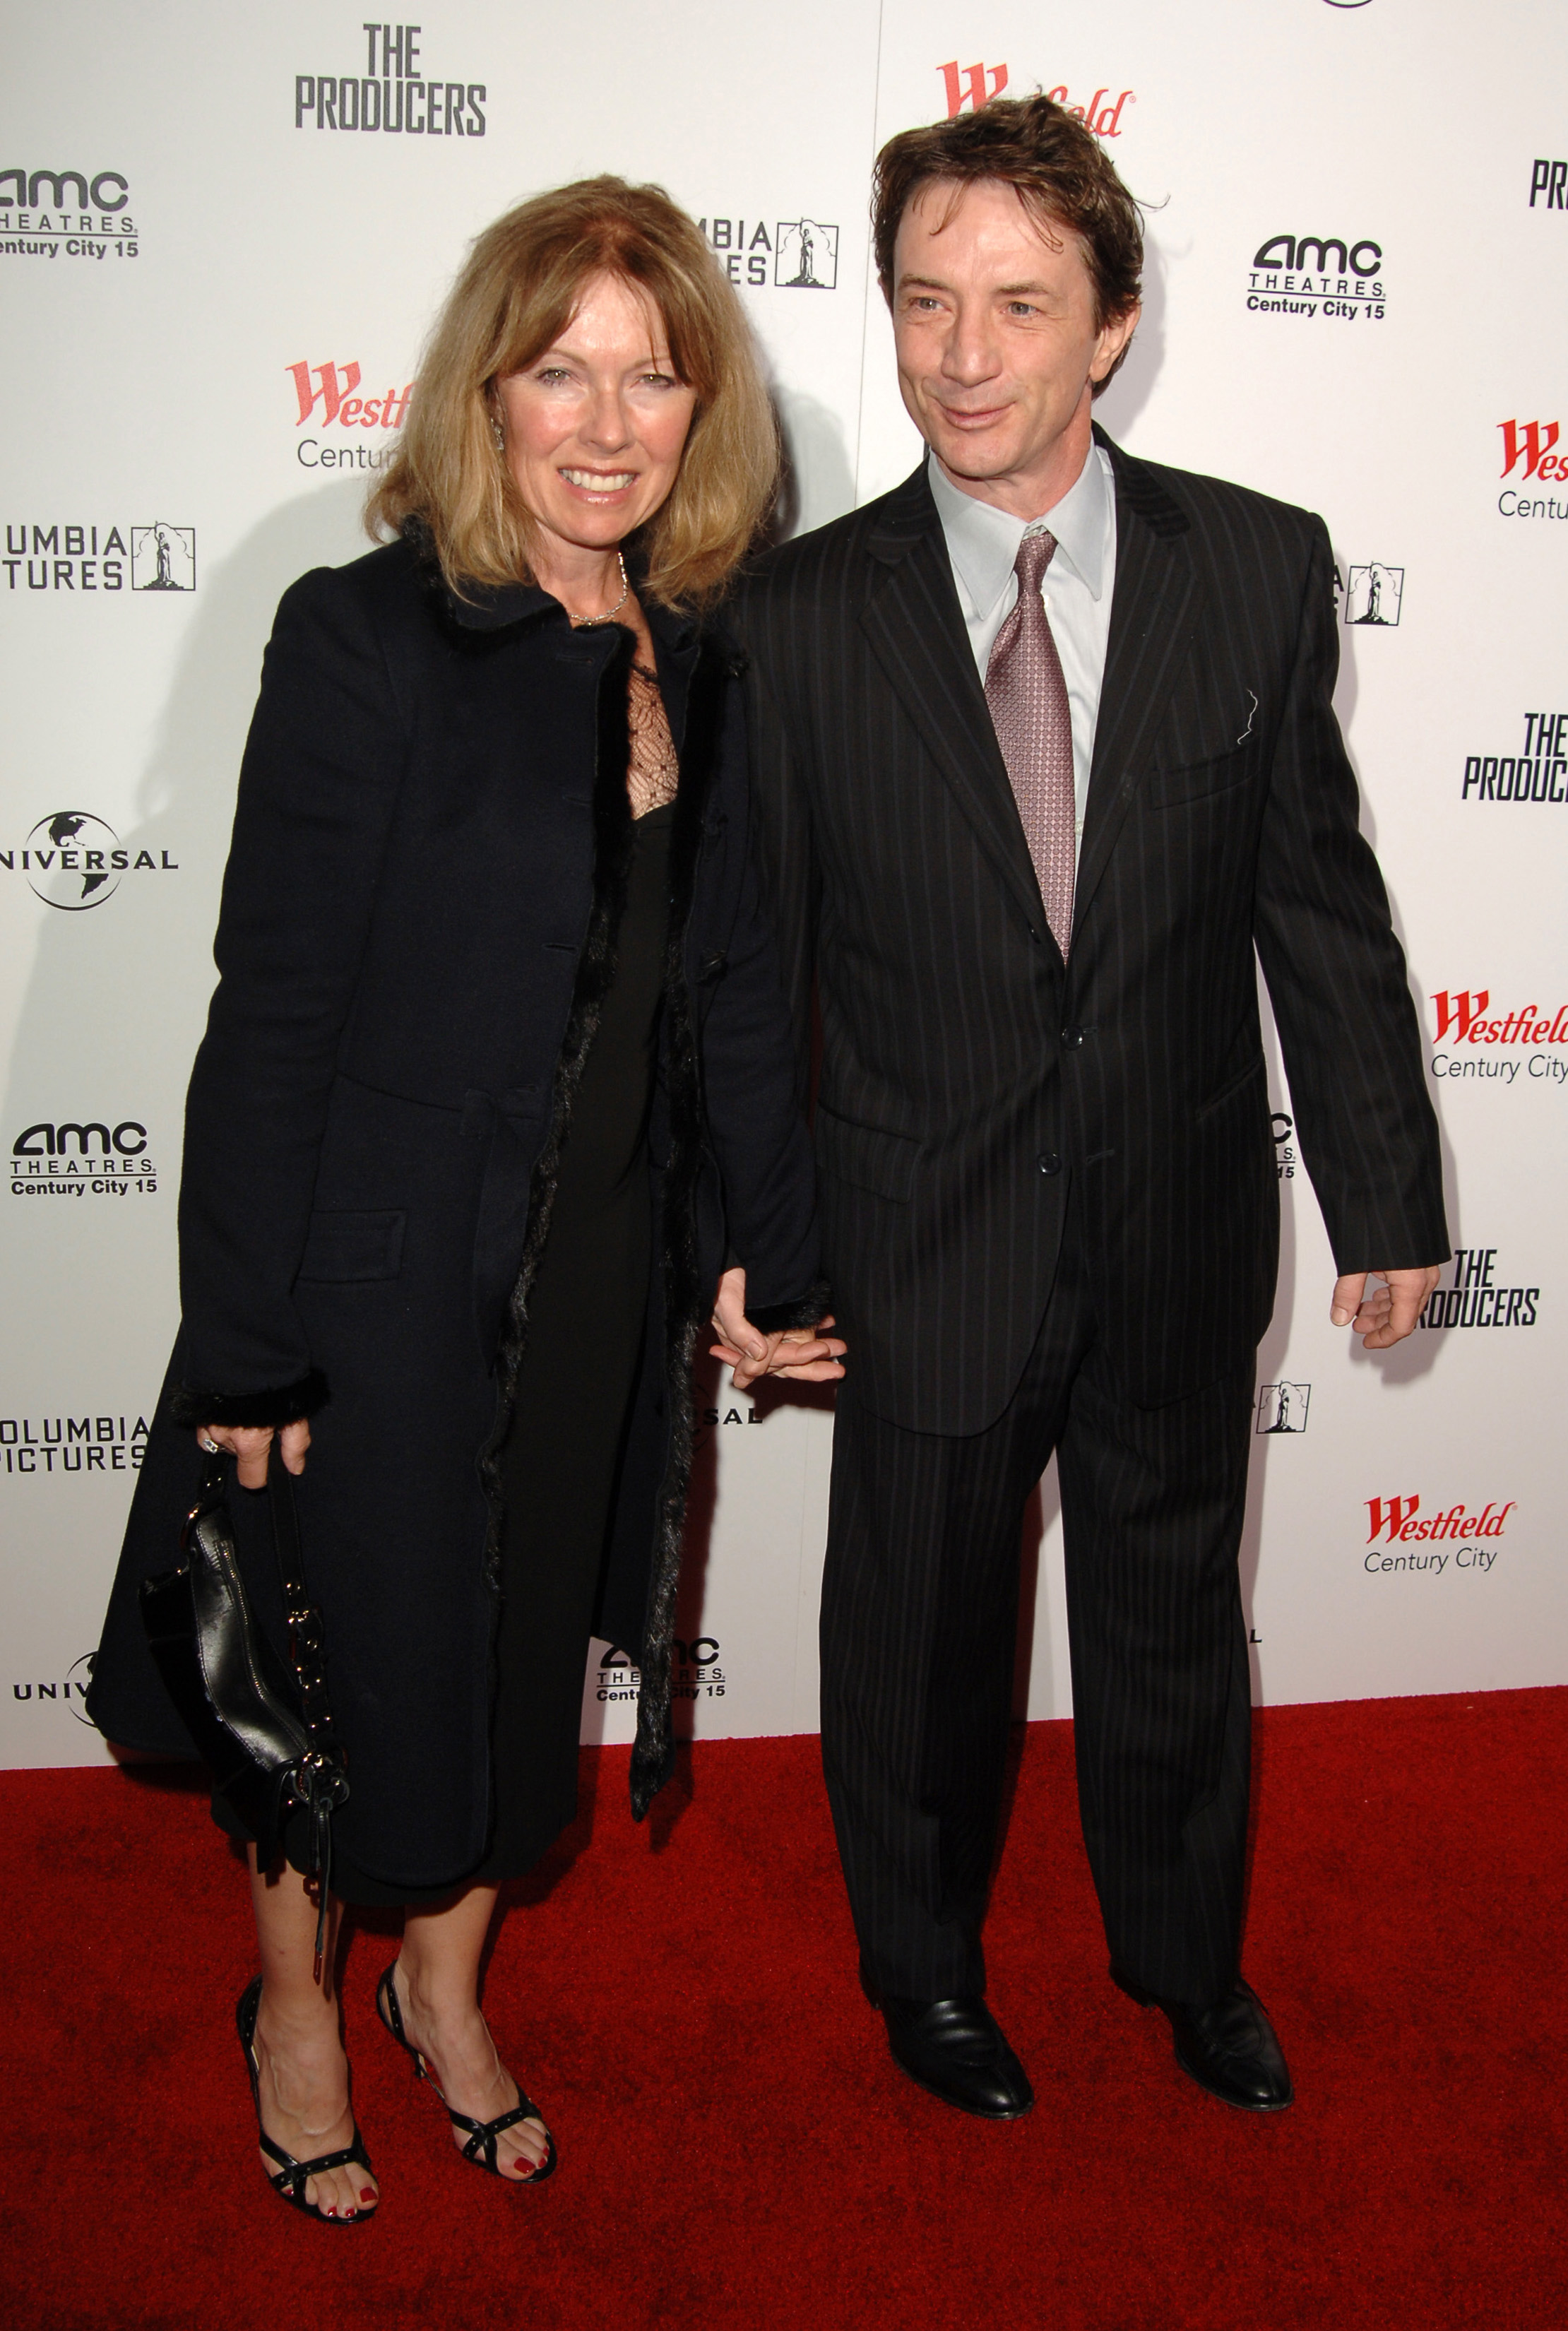 Nancy Dolman and Martin Short at the Universal Pictures' "The Producers" World Premiere - Arrivals, on December 12, 2005. | Source: Getty Images